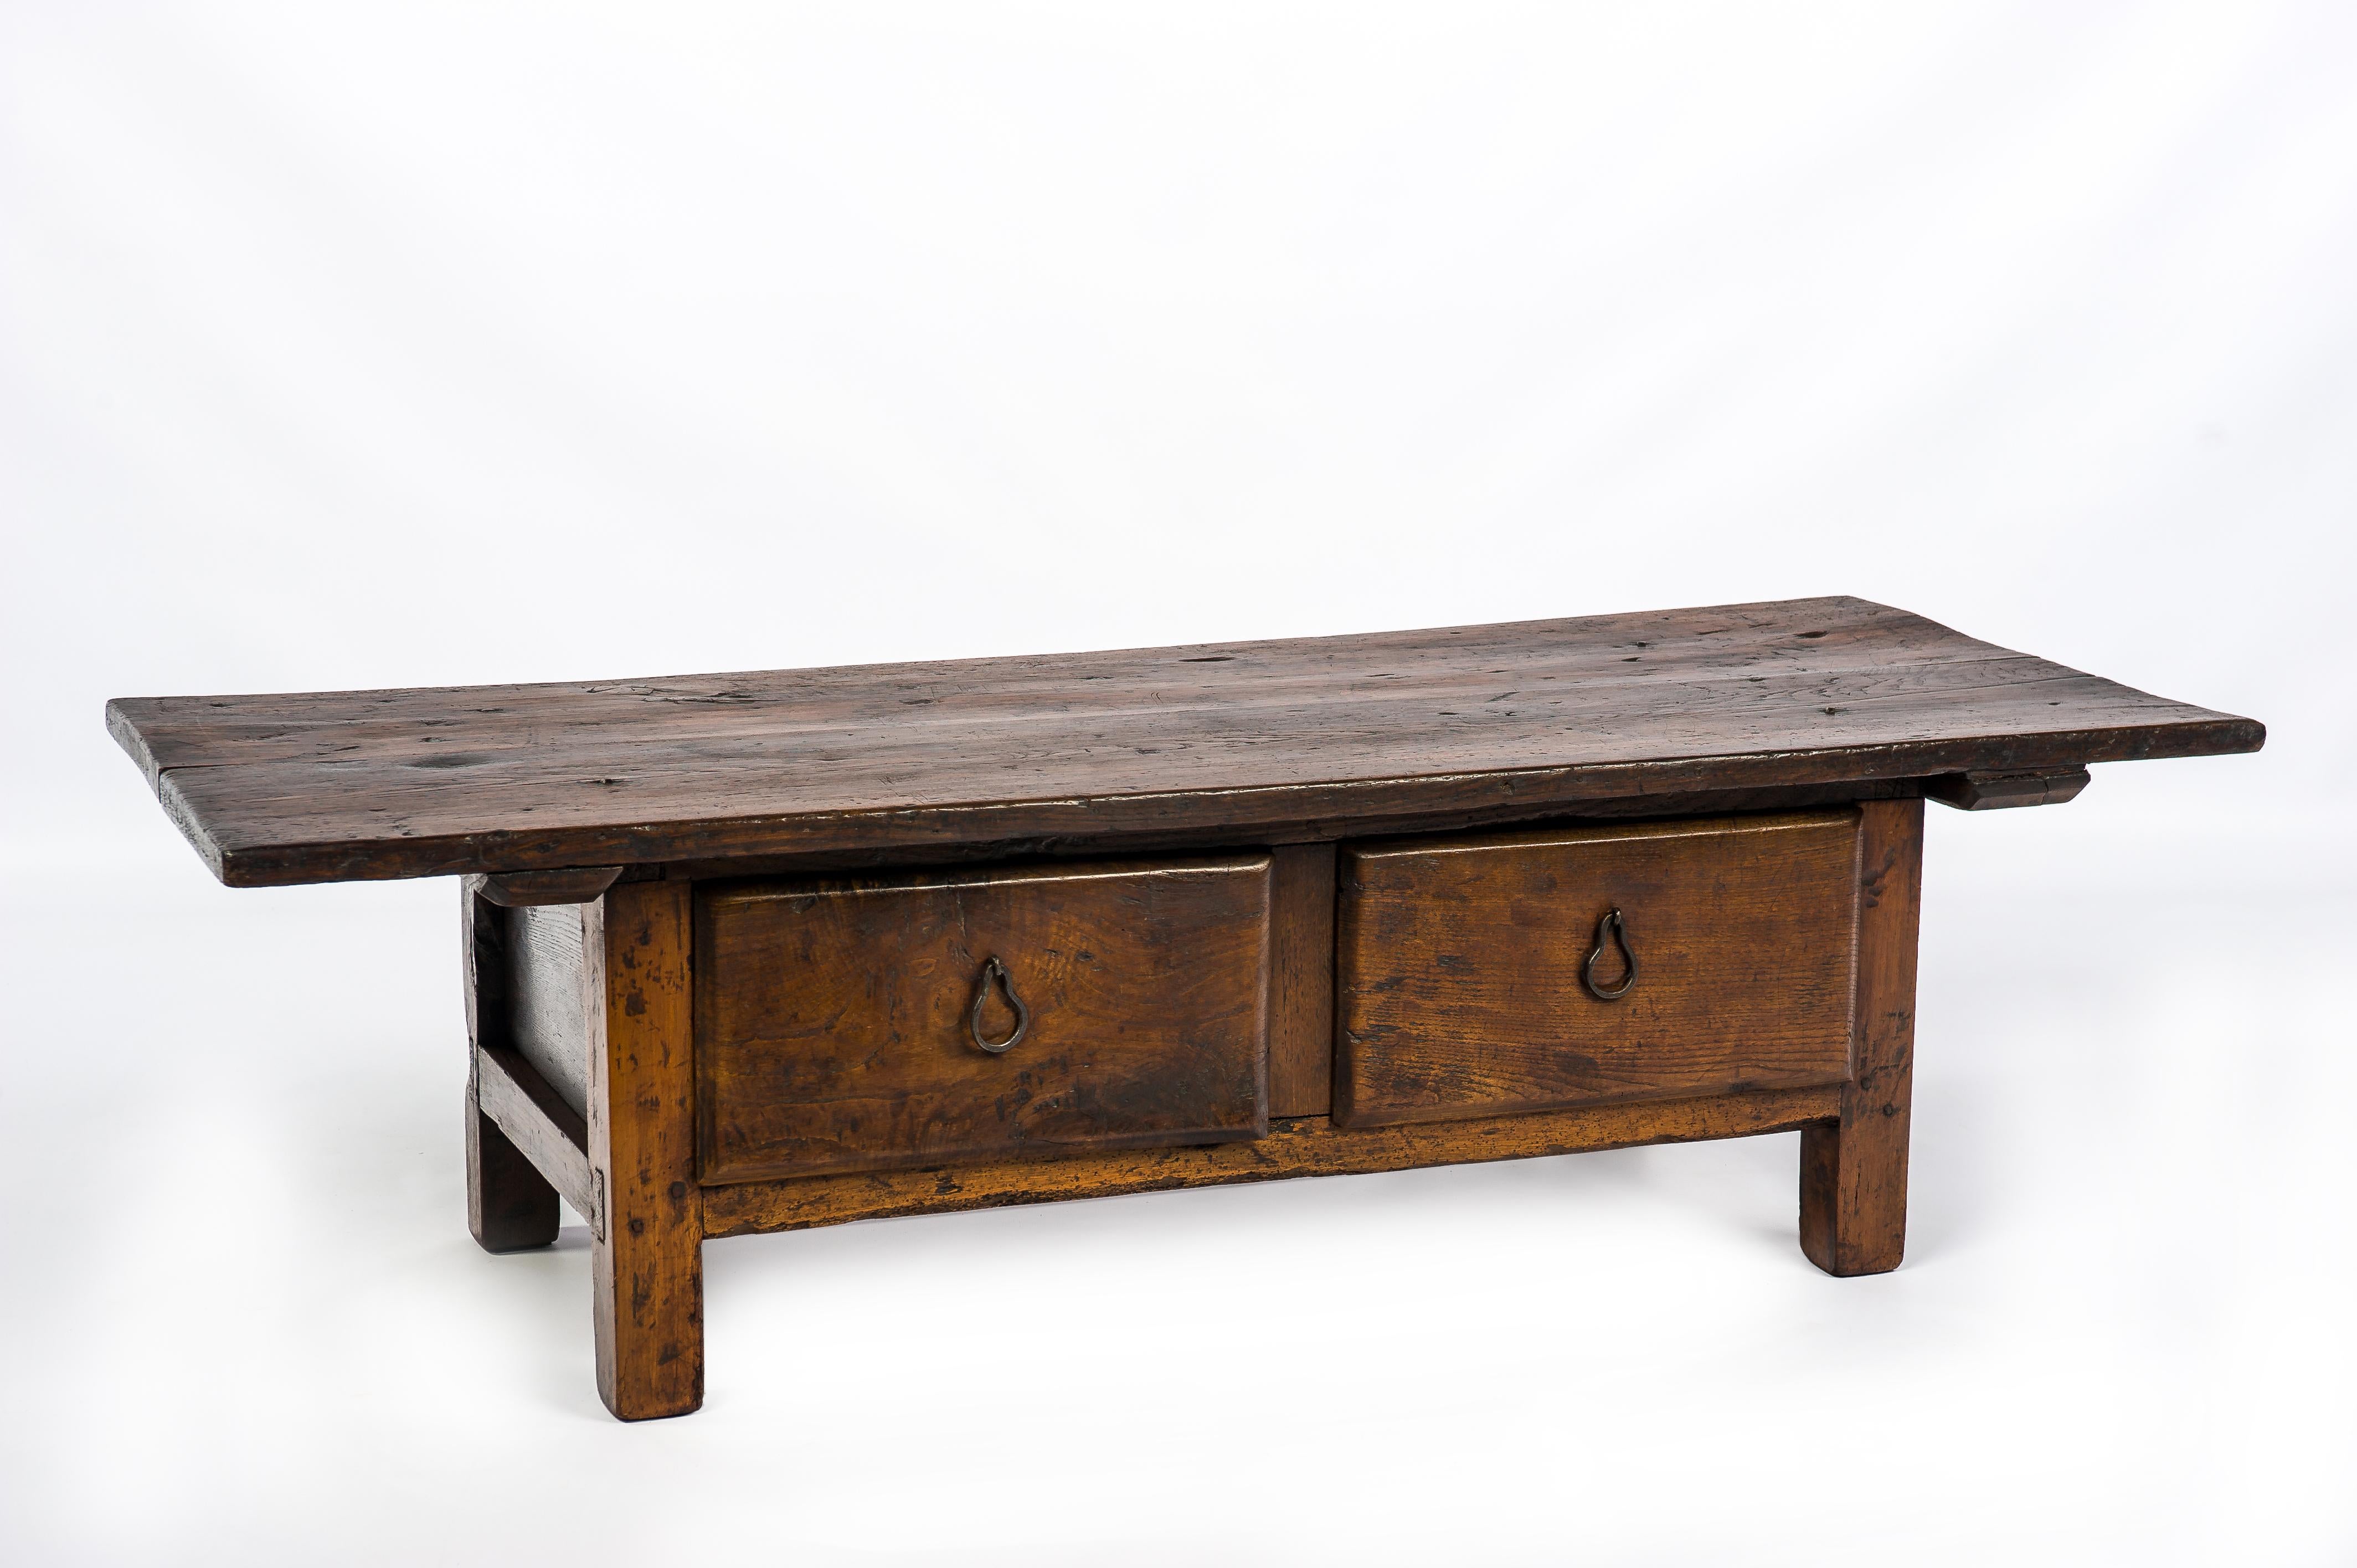 This beautiful warm brown color rustic coffee table or low table originates in rural Spain and dates circa 1750. The table has a fantastic top that was made from two boards of solid chestnut wood 1,2 inches thick. The top has a beautiful grain